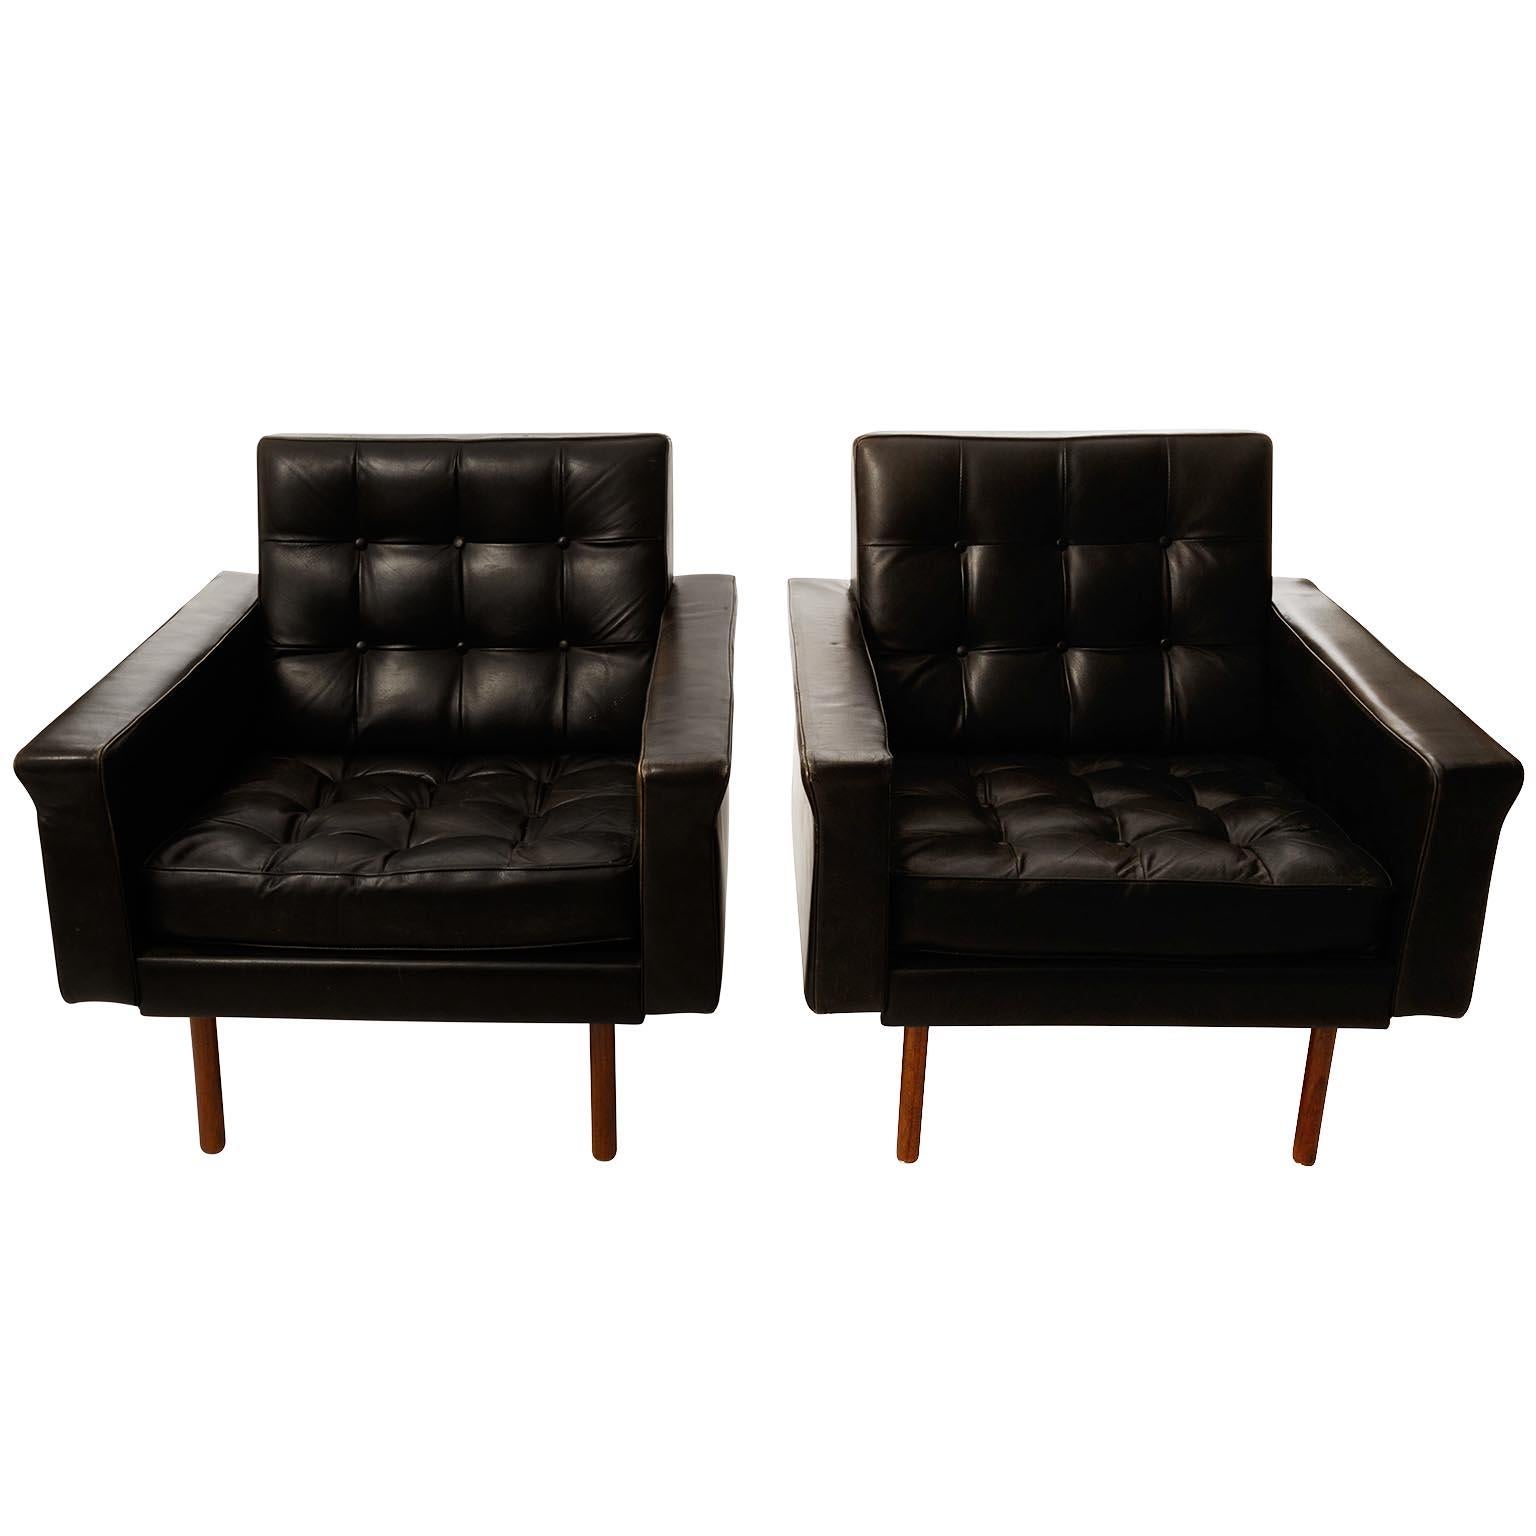 Mid-Century Modern Pair of Johannes Spalt Armchairs Lounge Chairs Wittmann Black Leather Wood 1960s For Sale